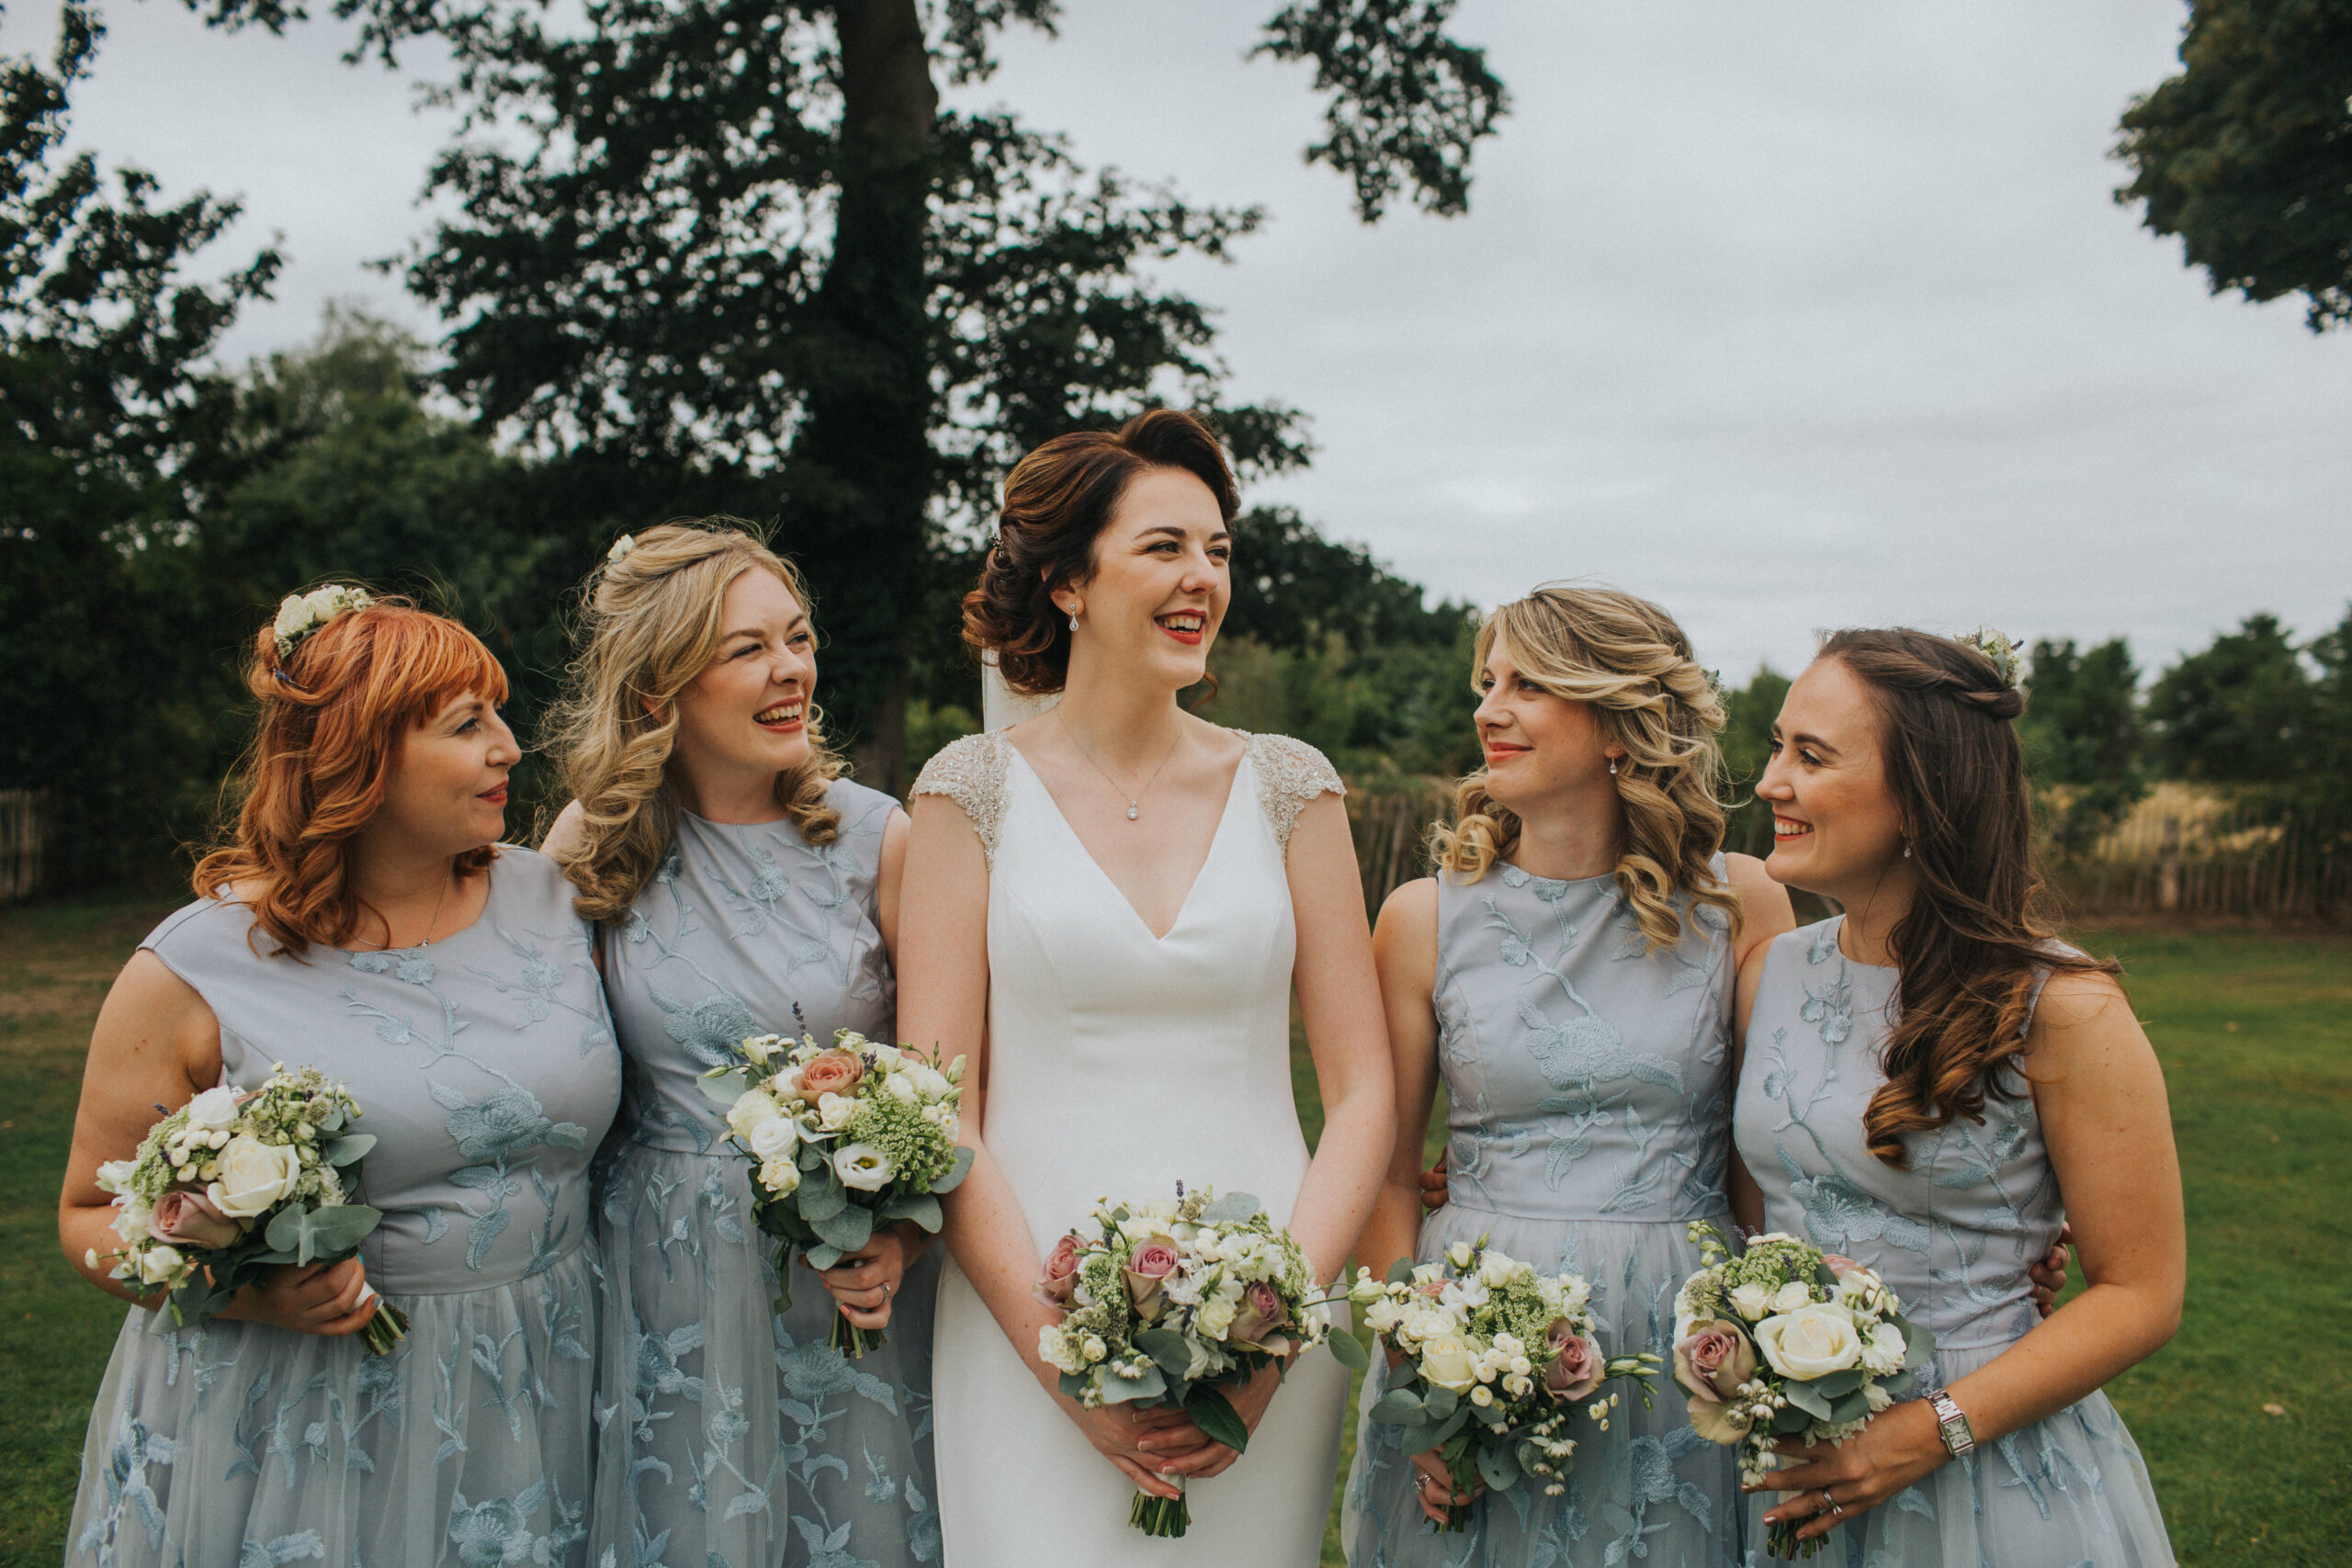 Bridal party laughter captured in the summer warmth